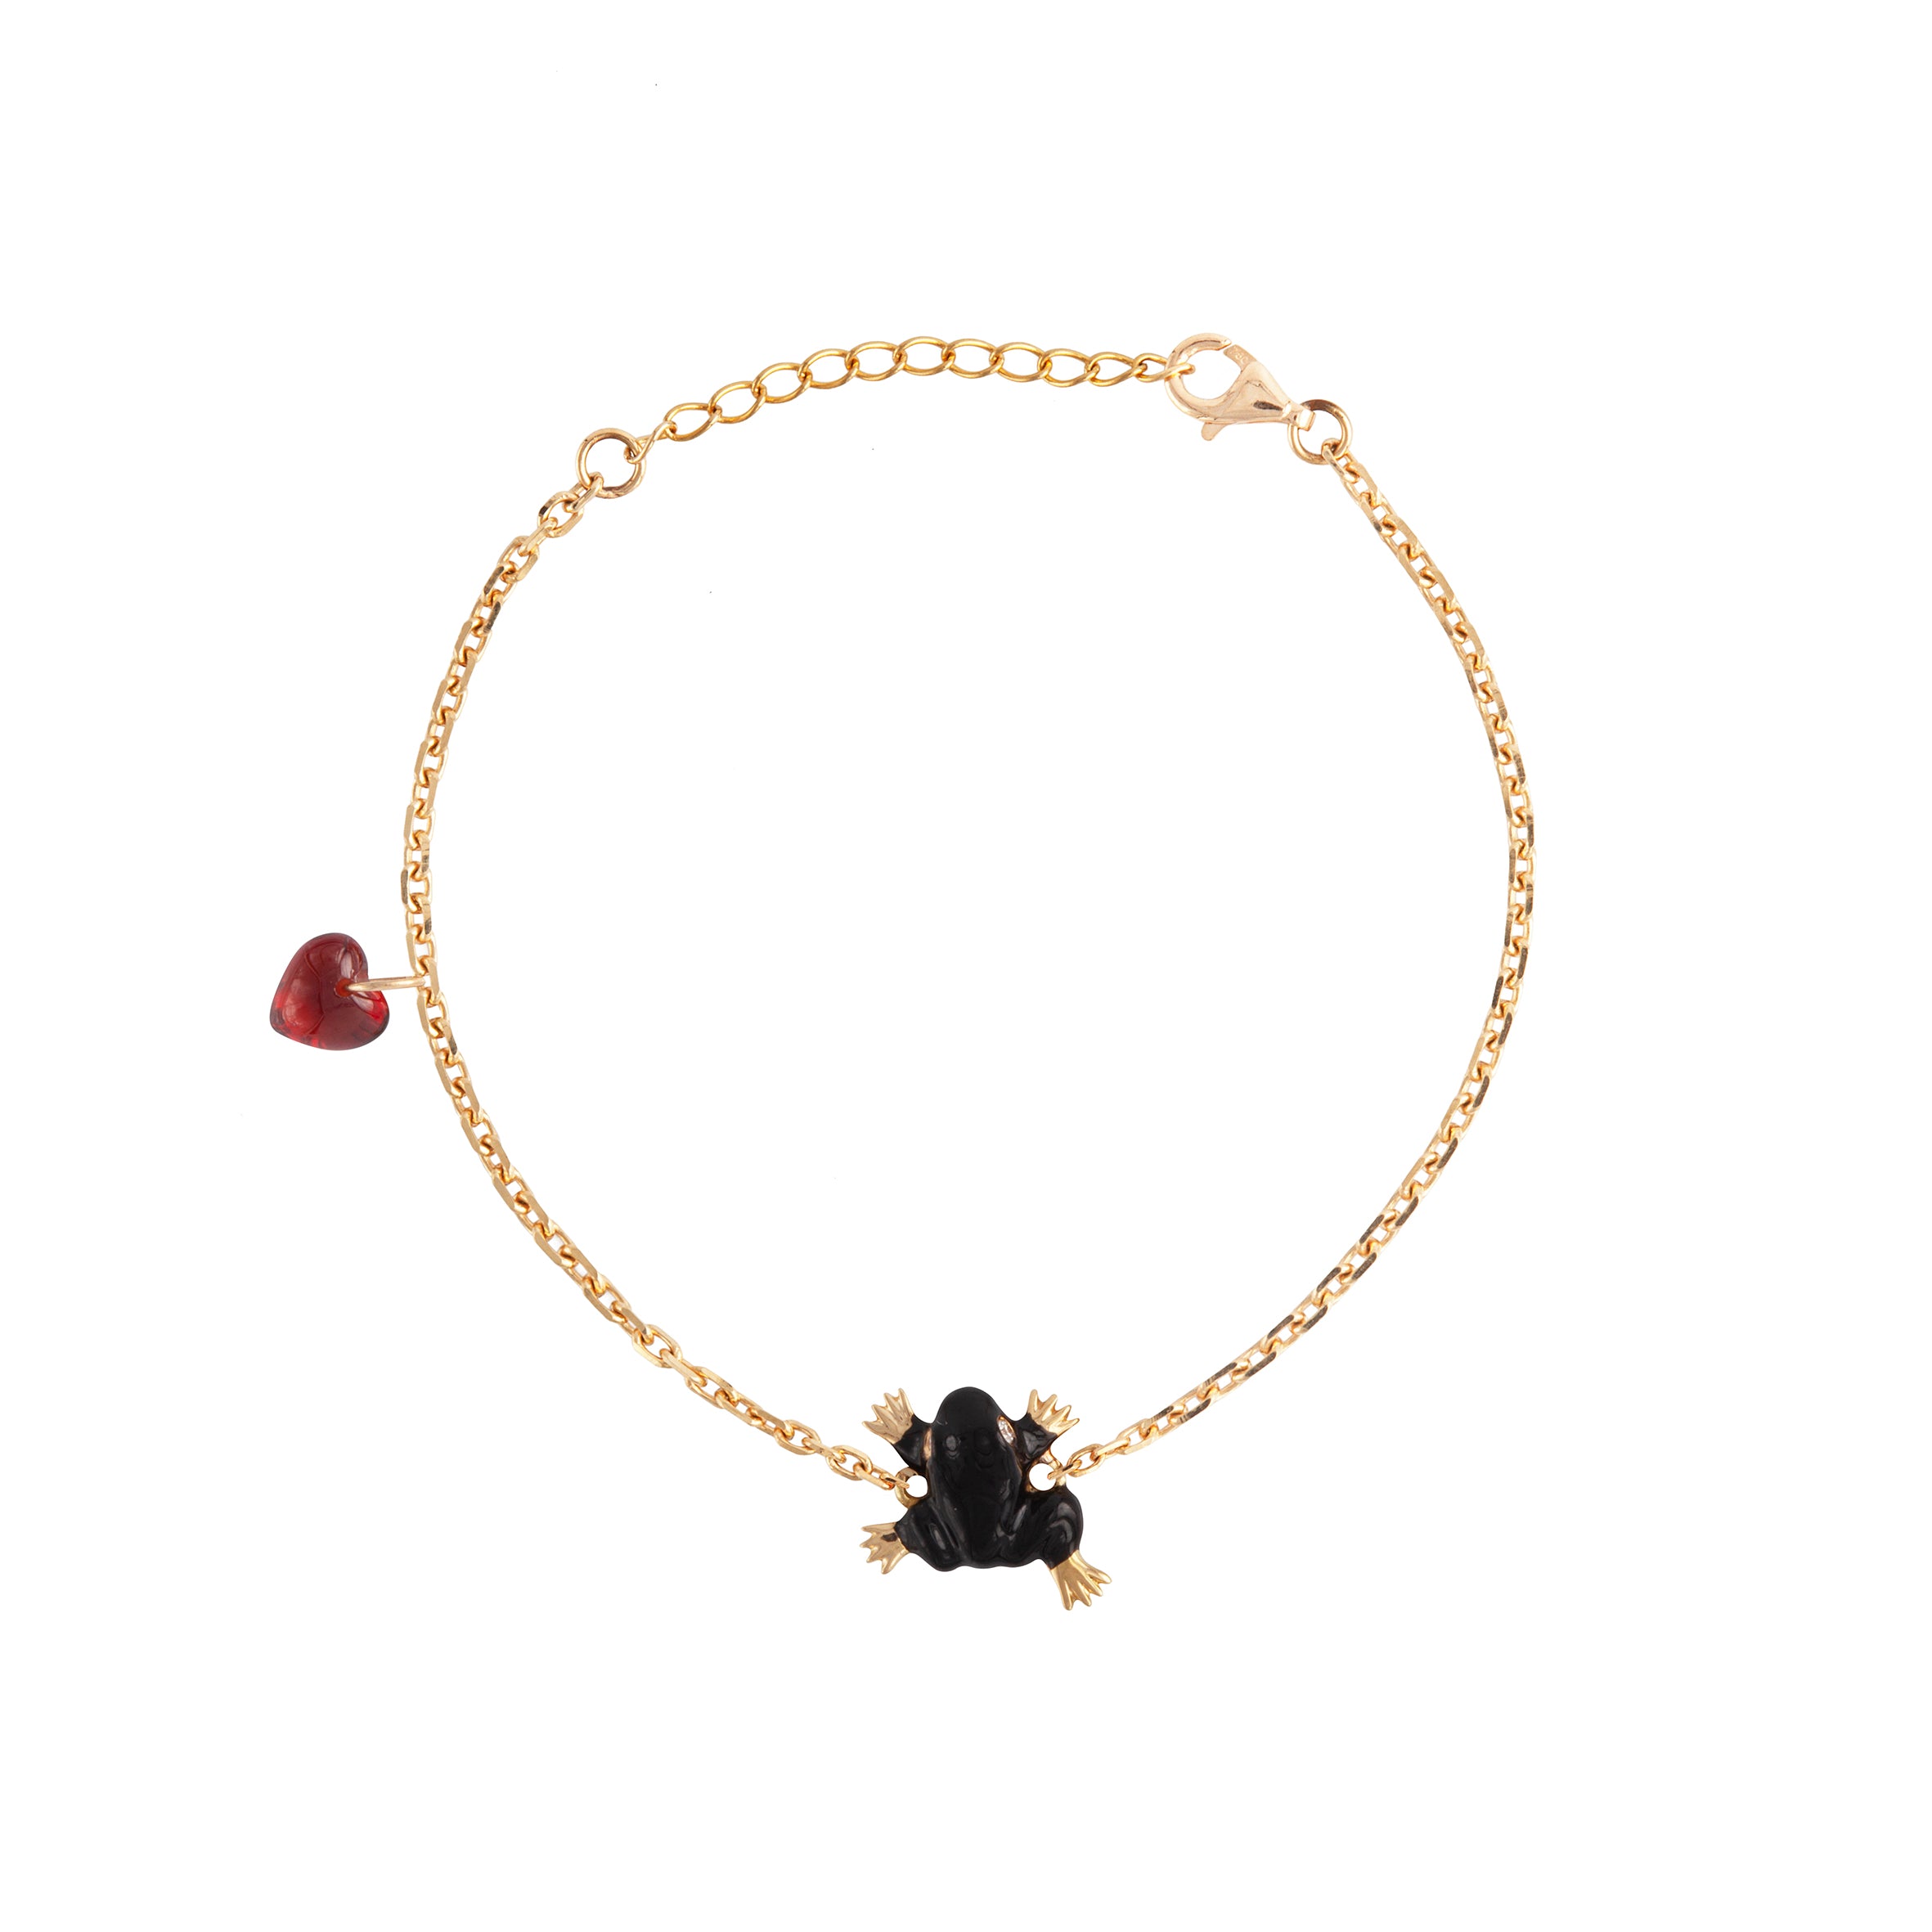 FROG BRACELET WITH HEART CHARM